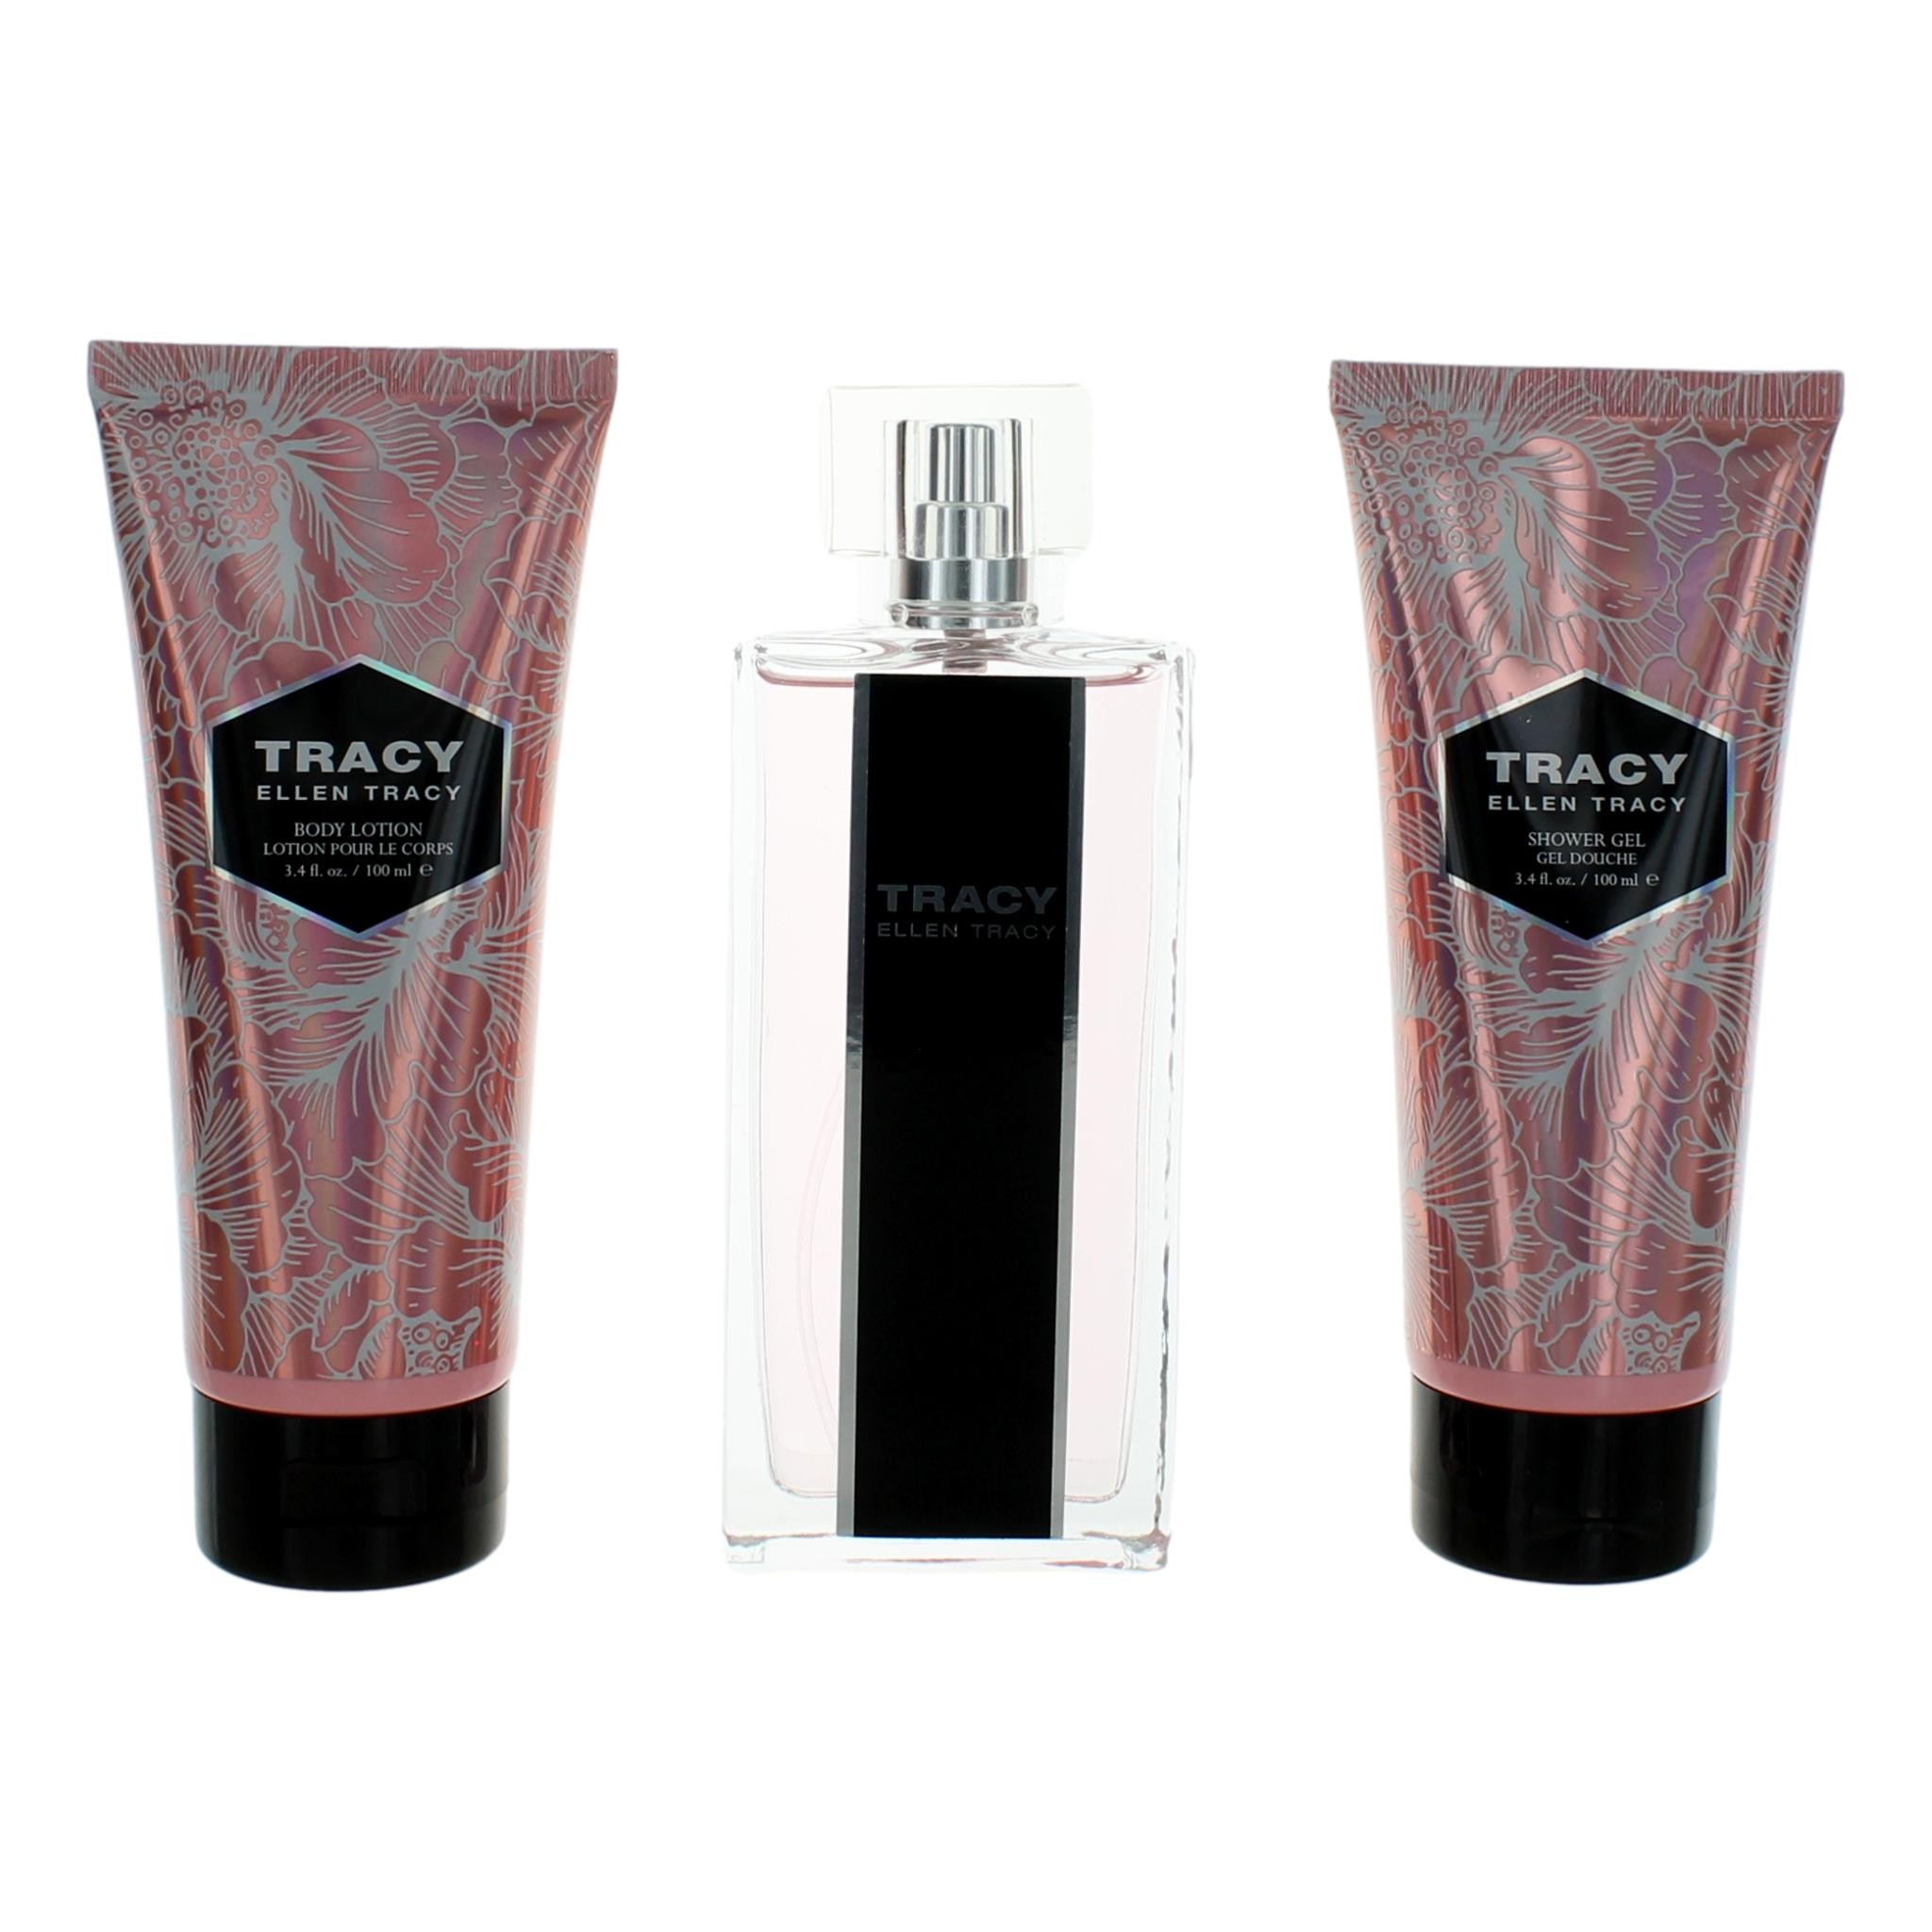 Tracy by Ellen Tracy 3 Piece Gift Set for Women